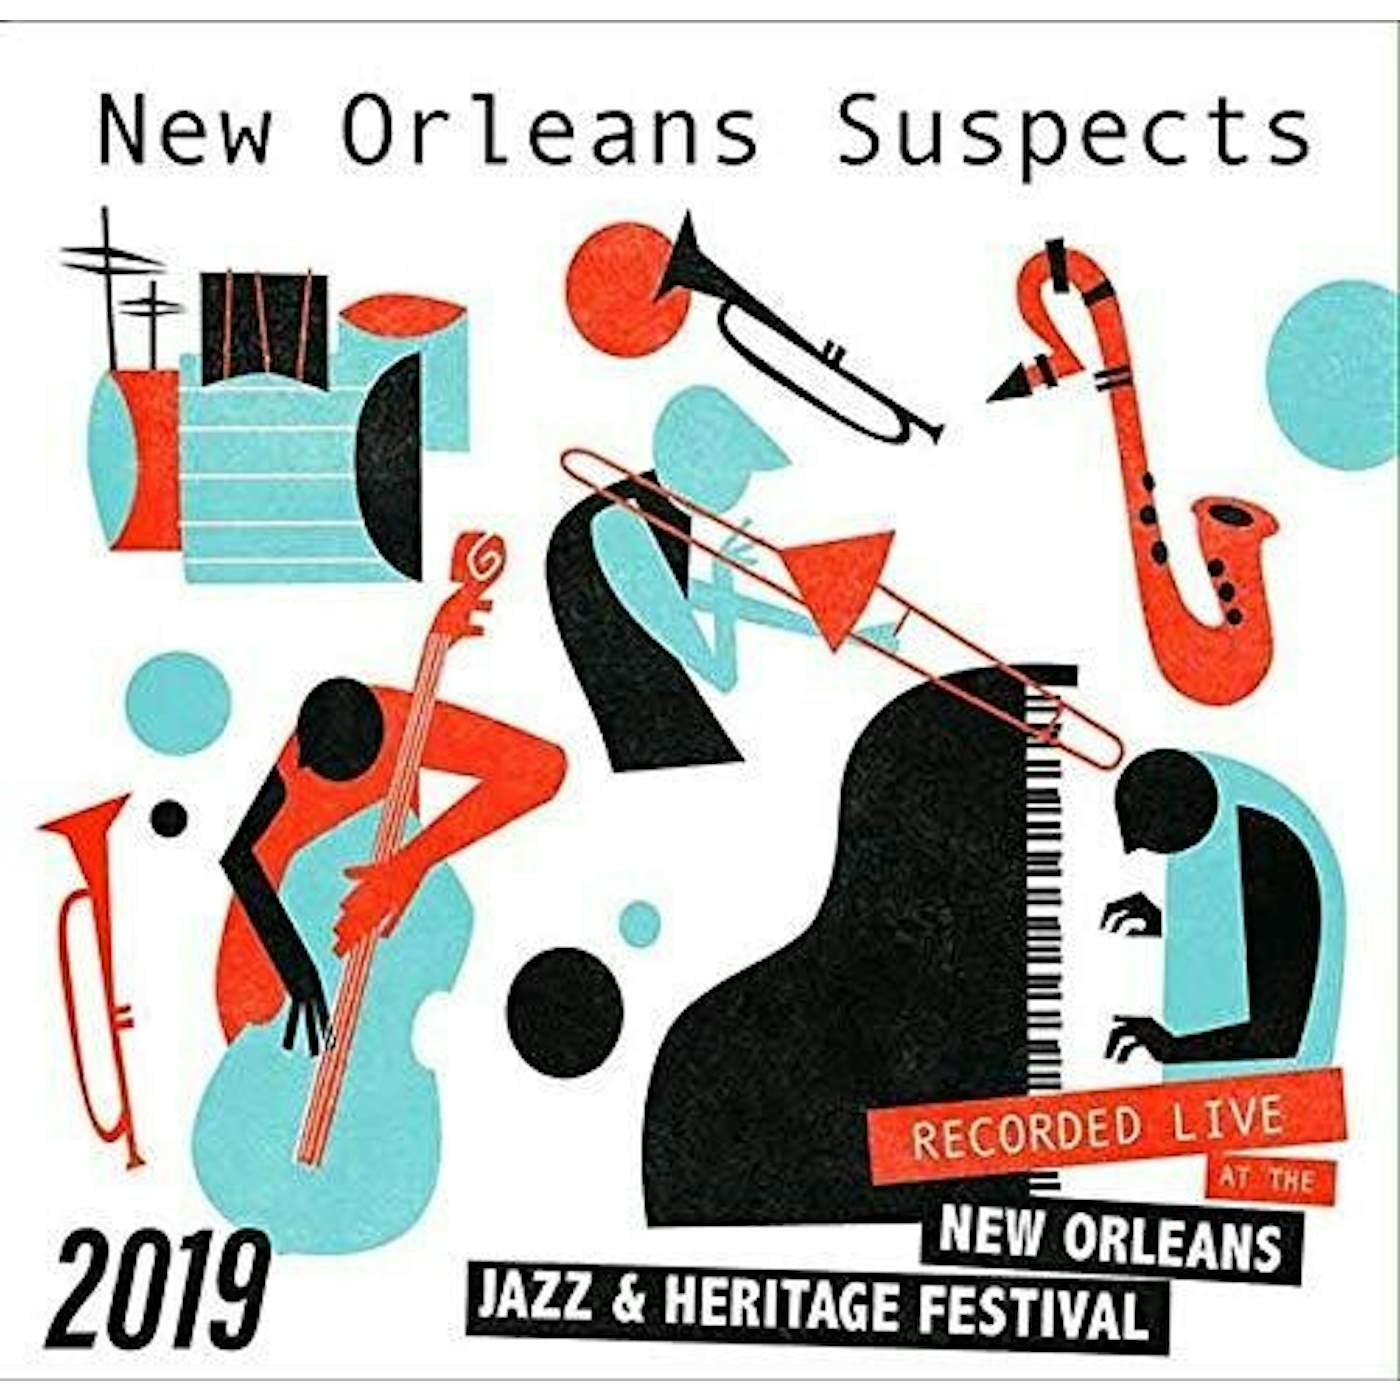 The New Orleans Suspects LIVE AT JAZZFEST 2019 CD